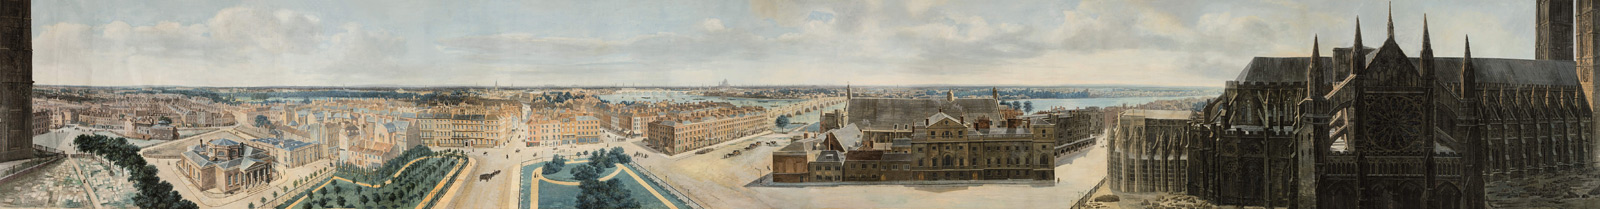 A sweeping view showing the area around Westminster.